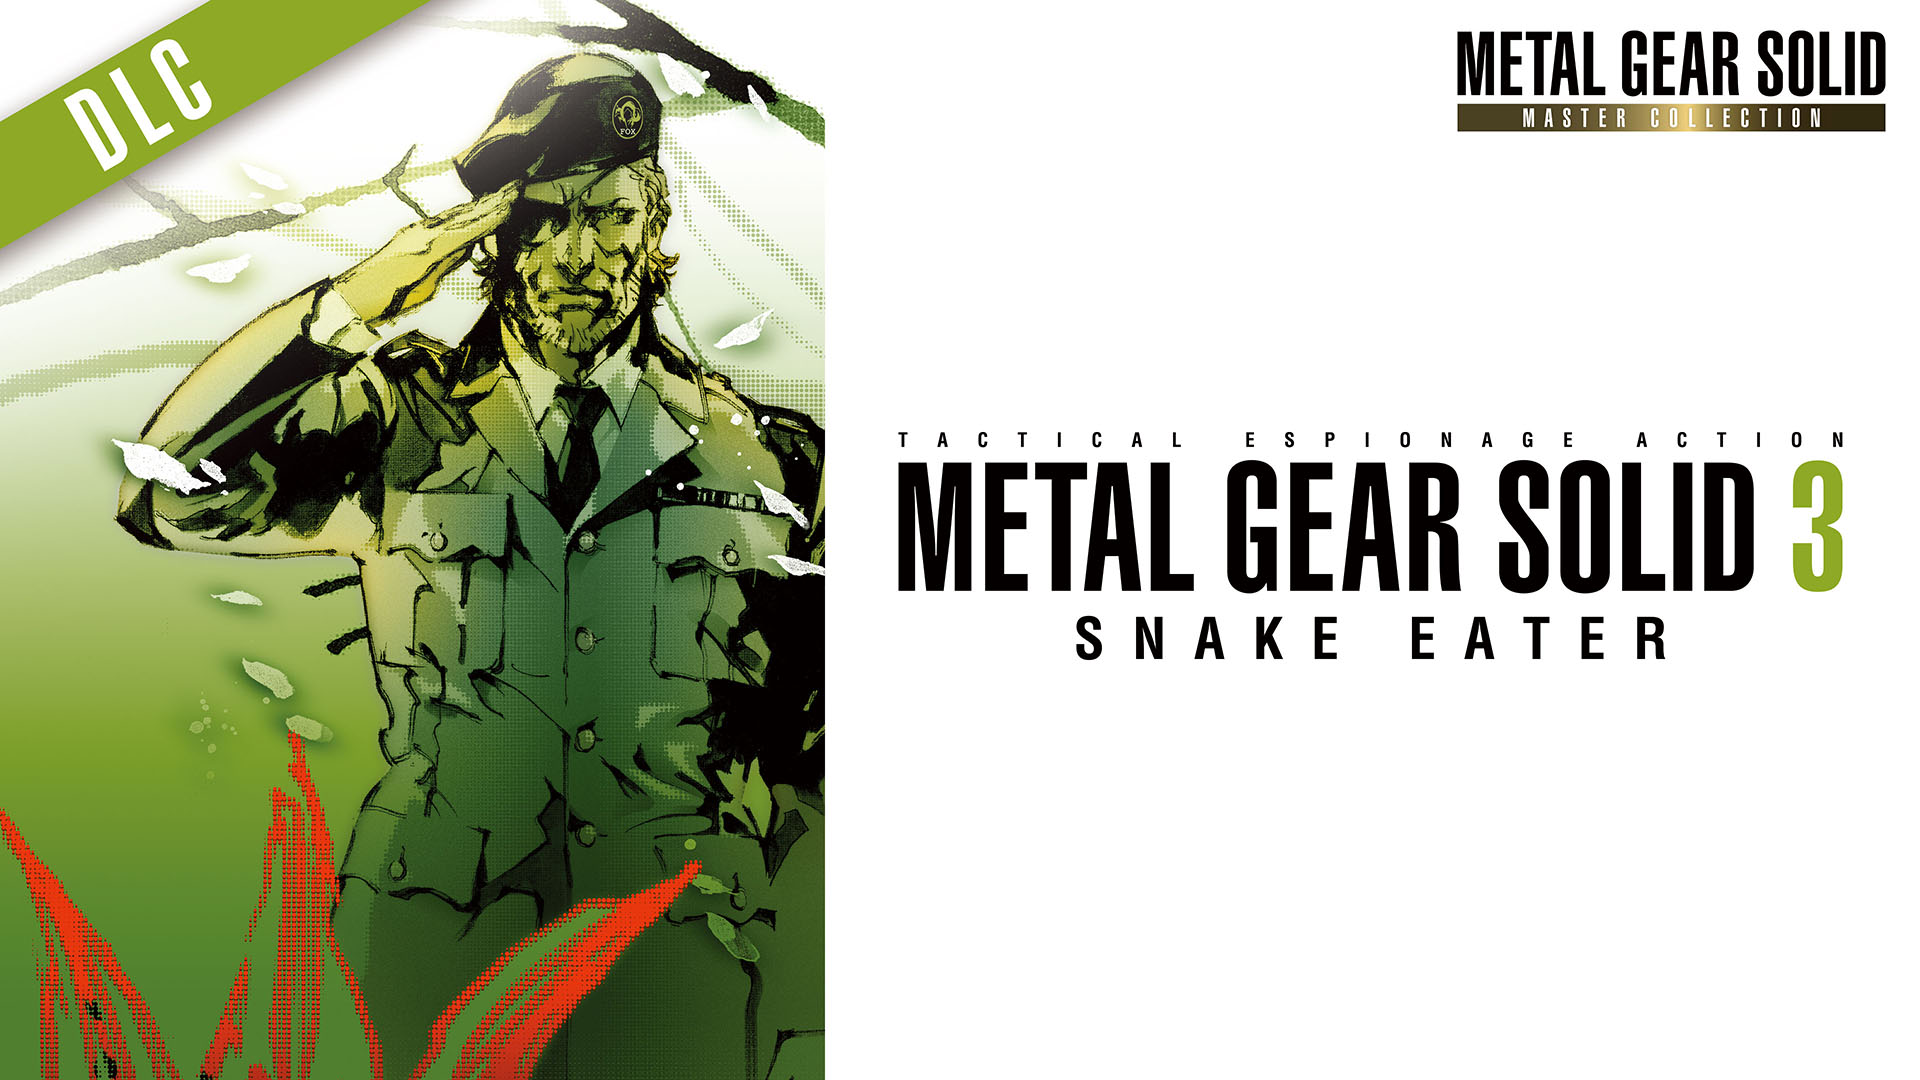 METAL GEAR SOLID 3: Snake Eater - Master Collection Version Japanese Language Pack